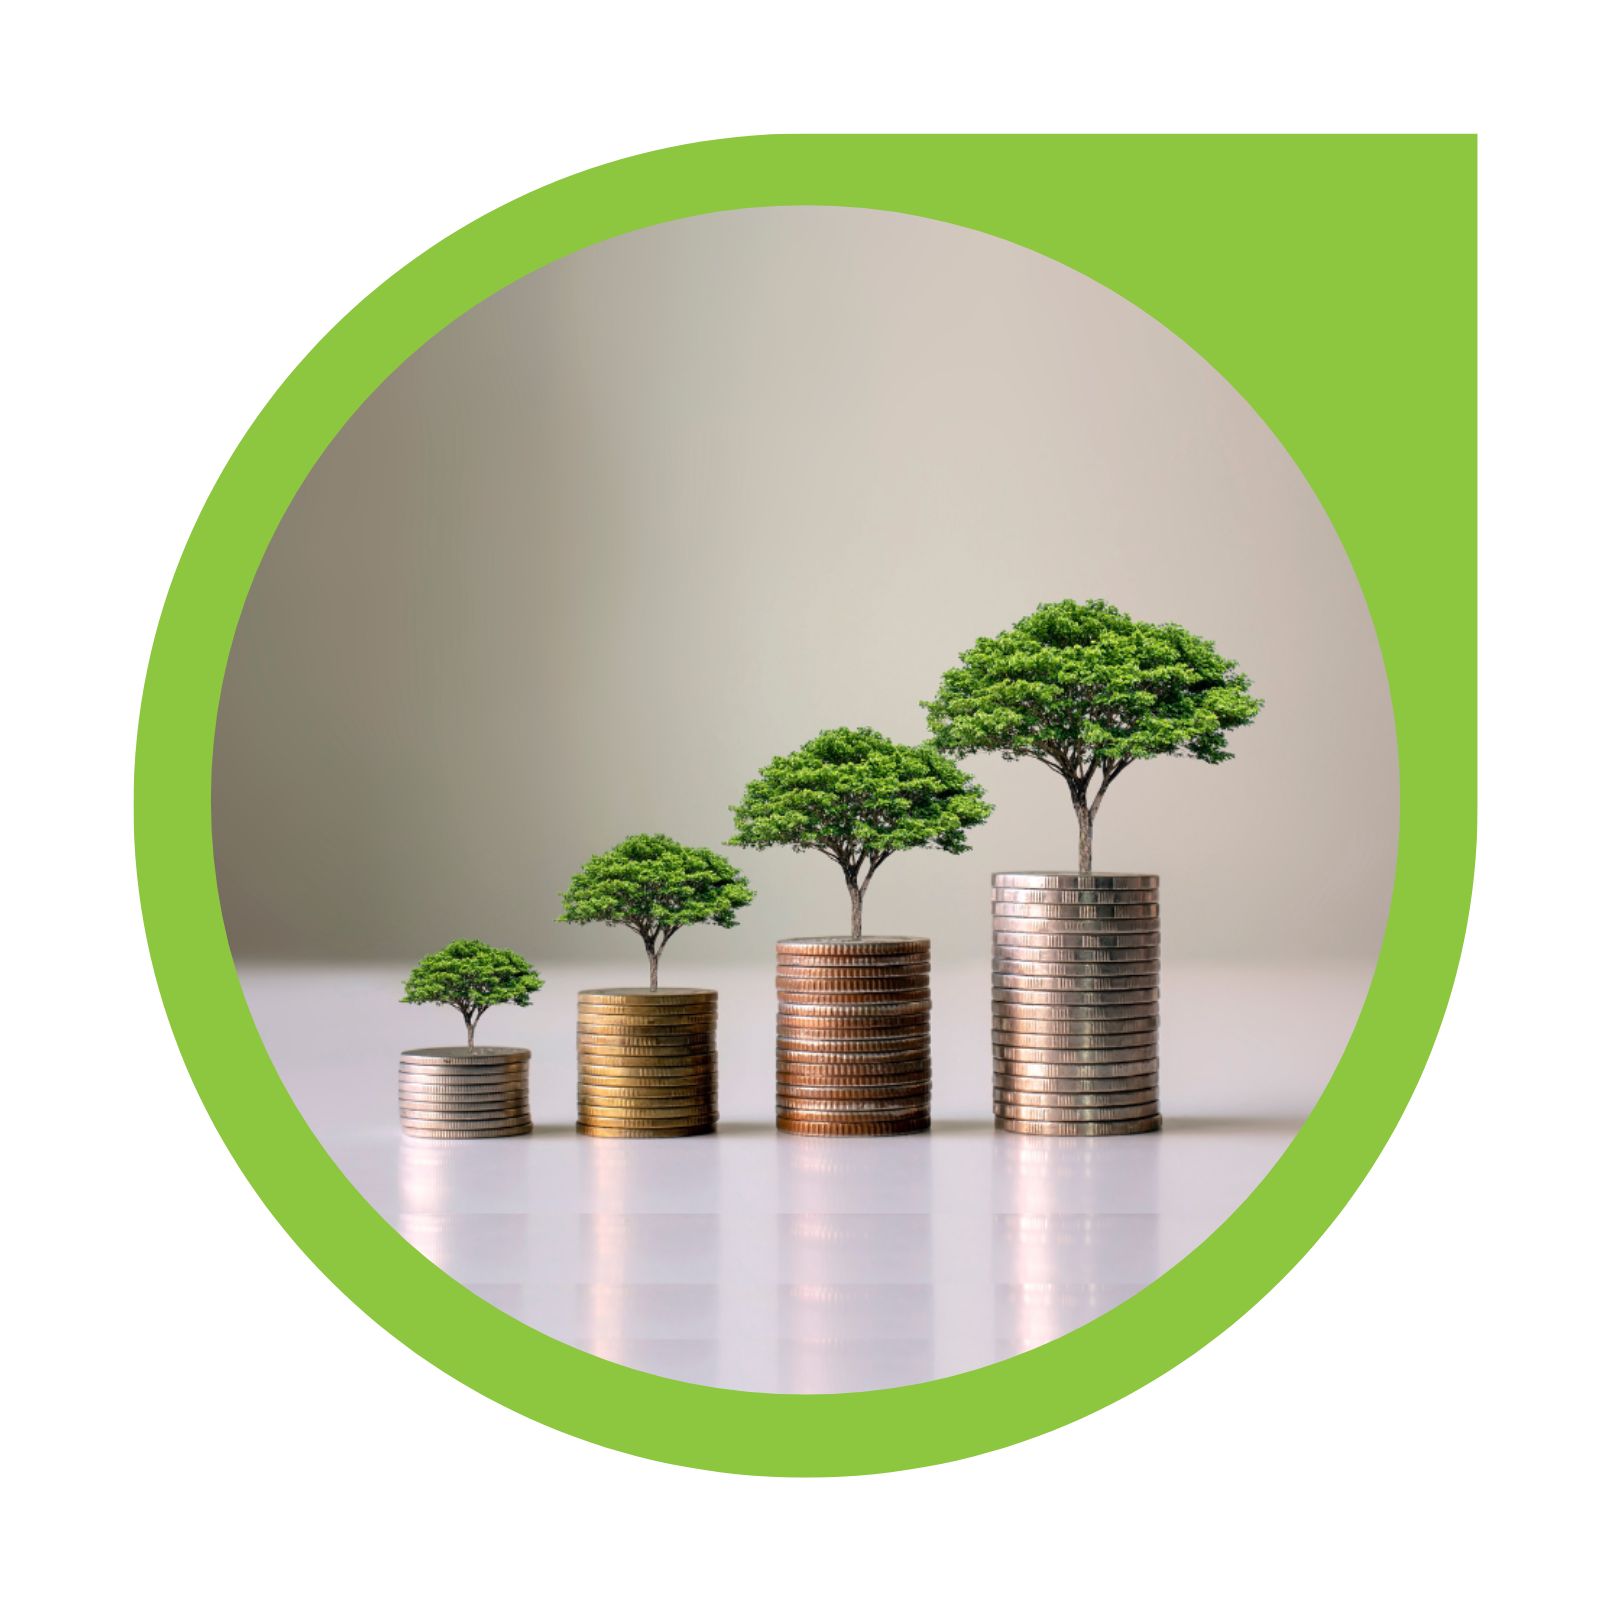 Developing Trees and Coins